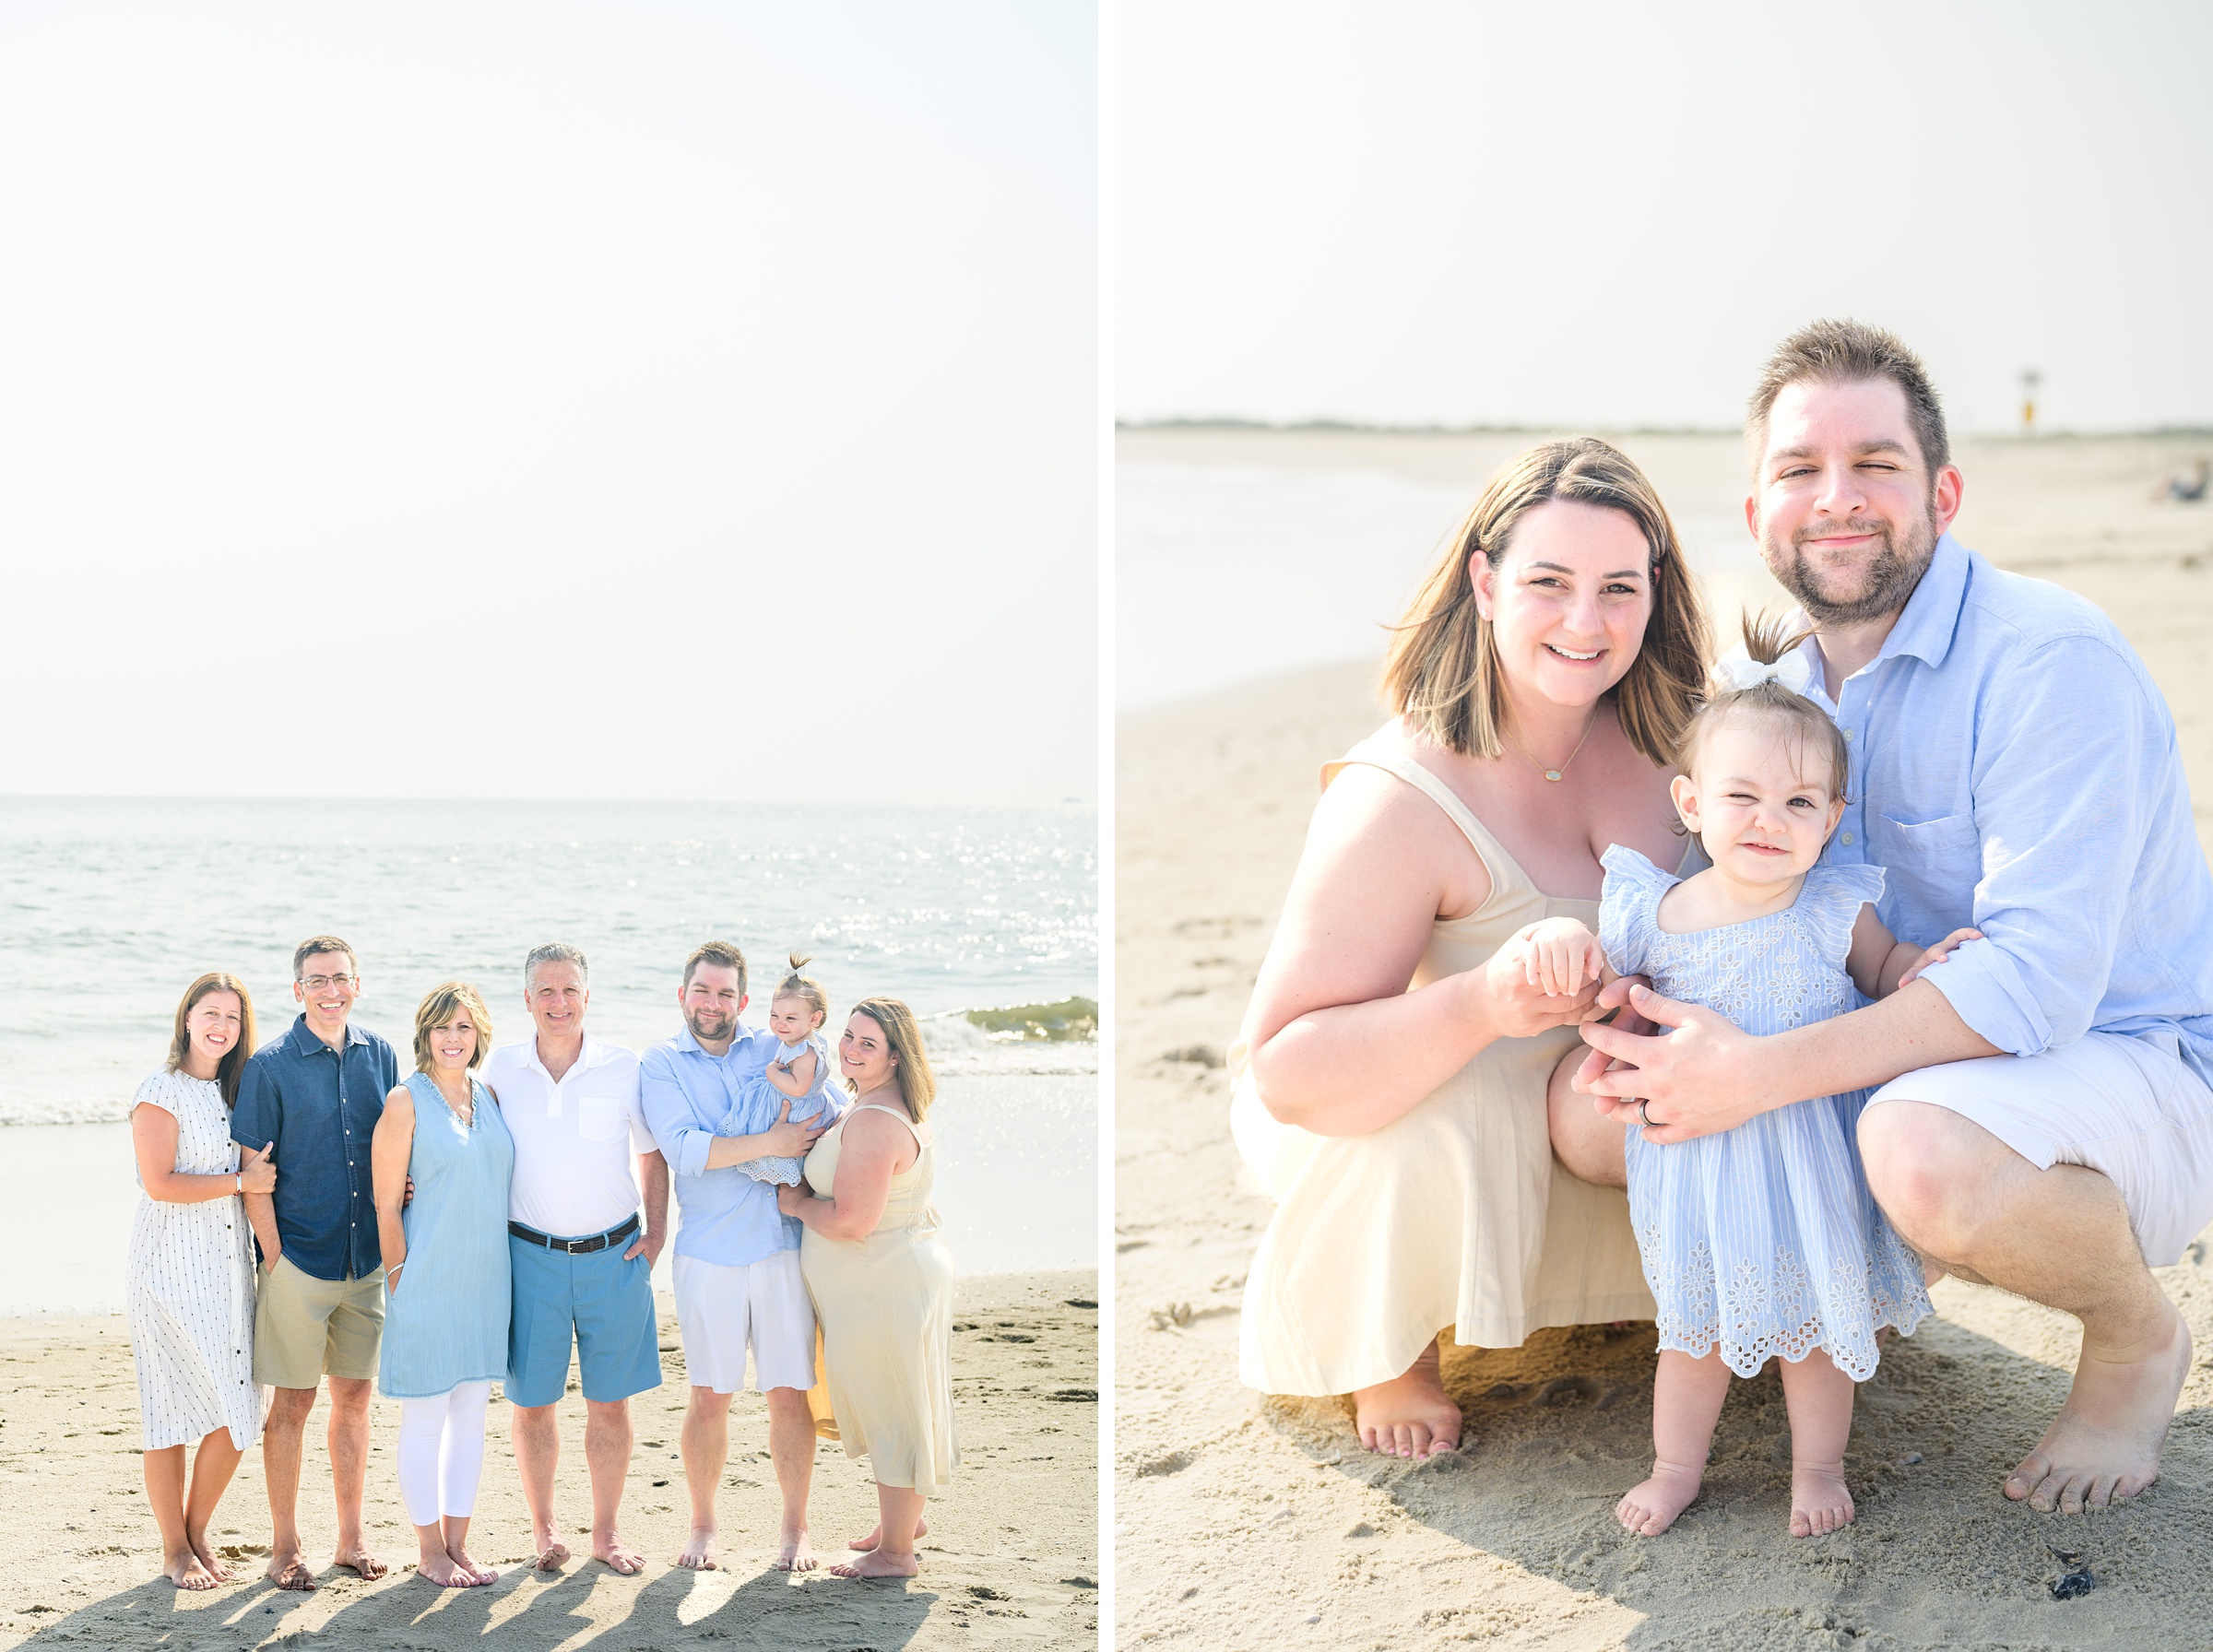 Extended family portraits at Cape May's Cove beach in Maryland, photographed by Cape May Family Photographer Cait Kramer.